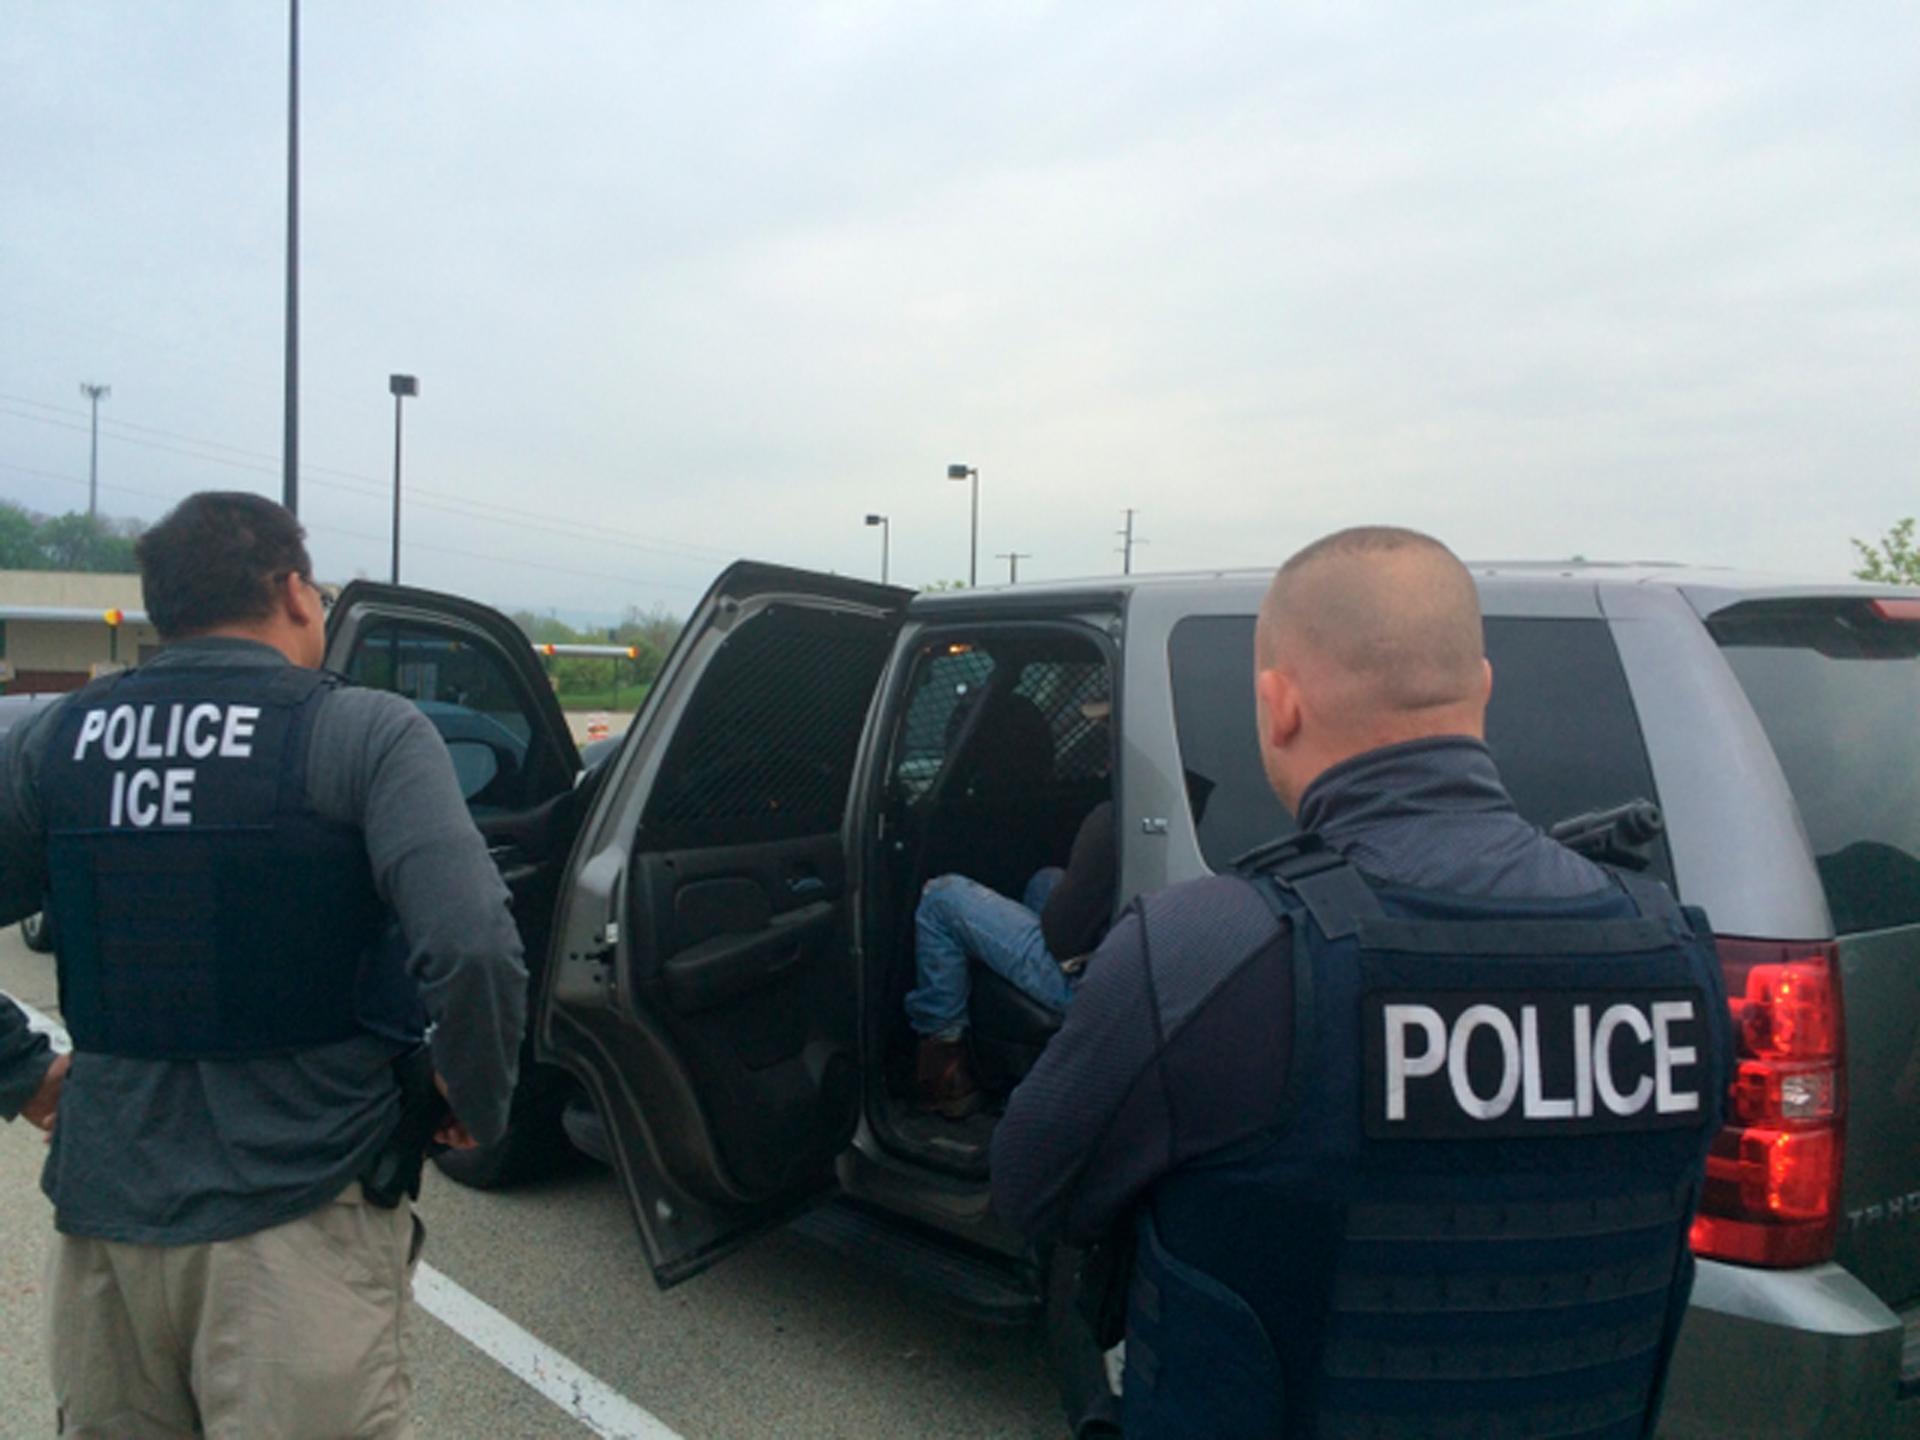 Agents with vests placing a man in car